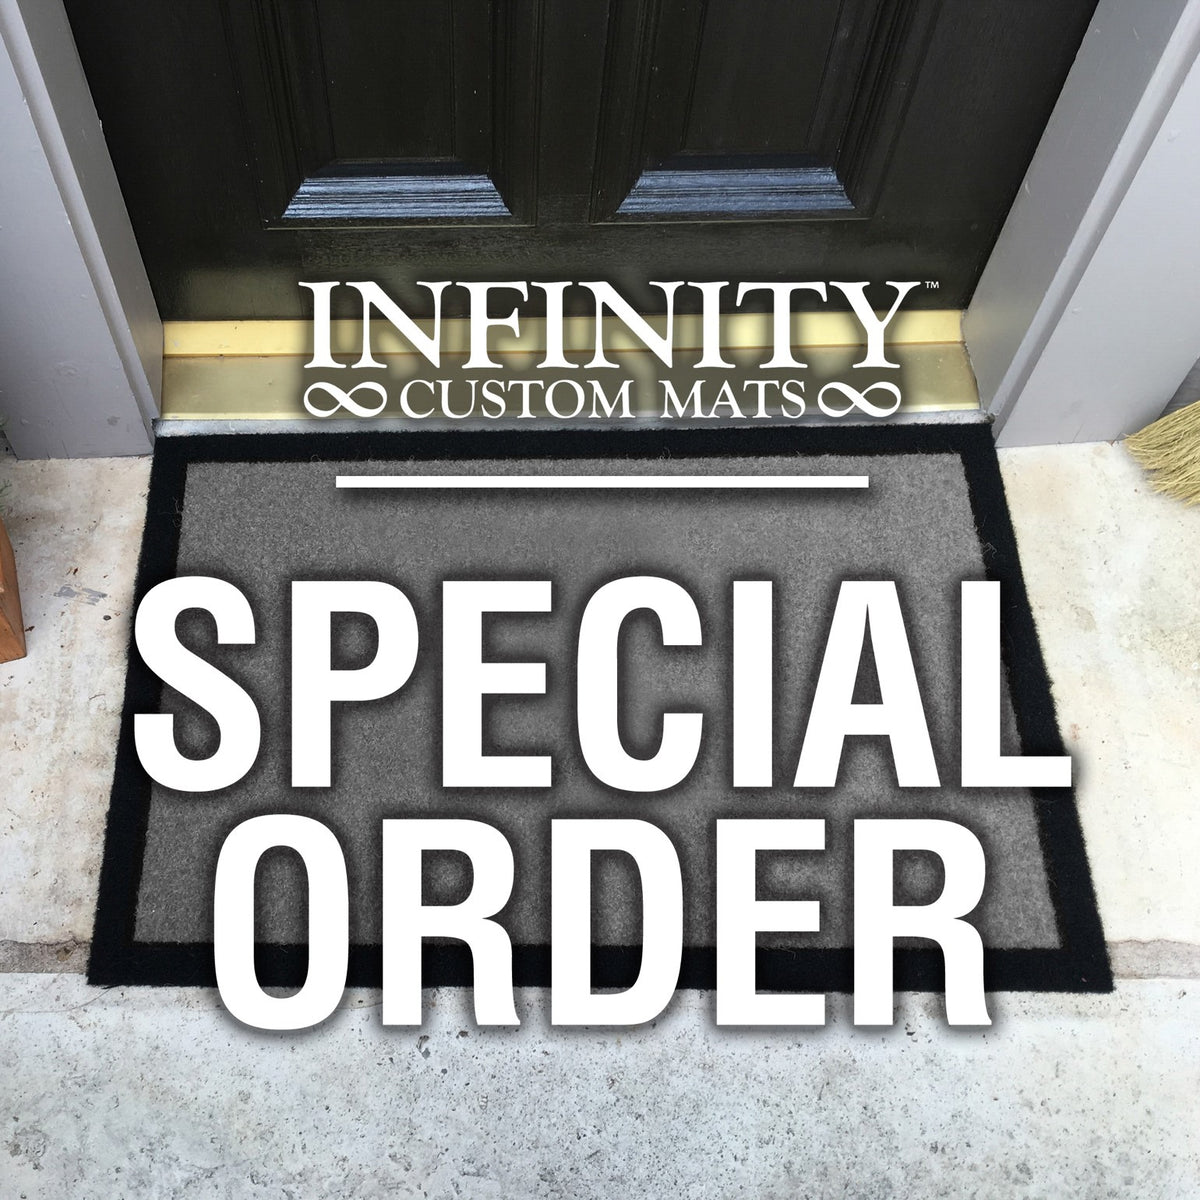 Infinity Custom Mats™ All-Weather Personalized Doormat - SPECIAL ORDER - Four Color Options